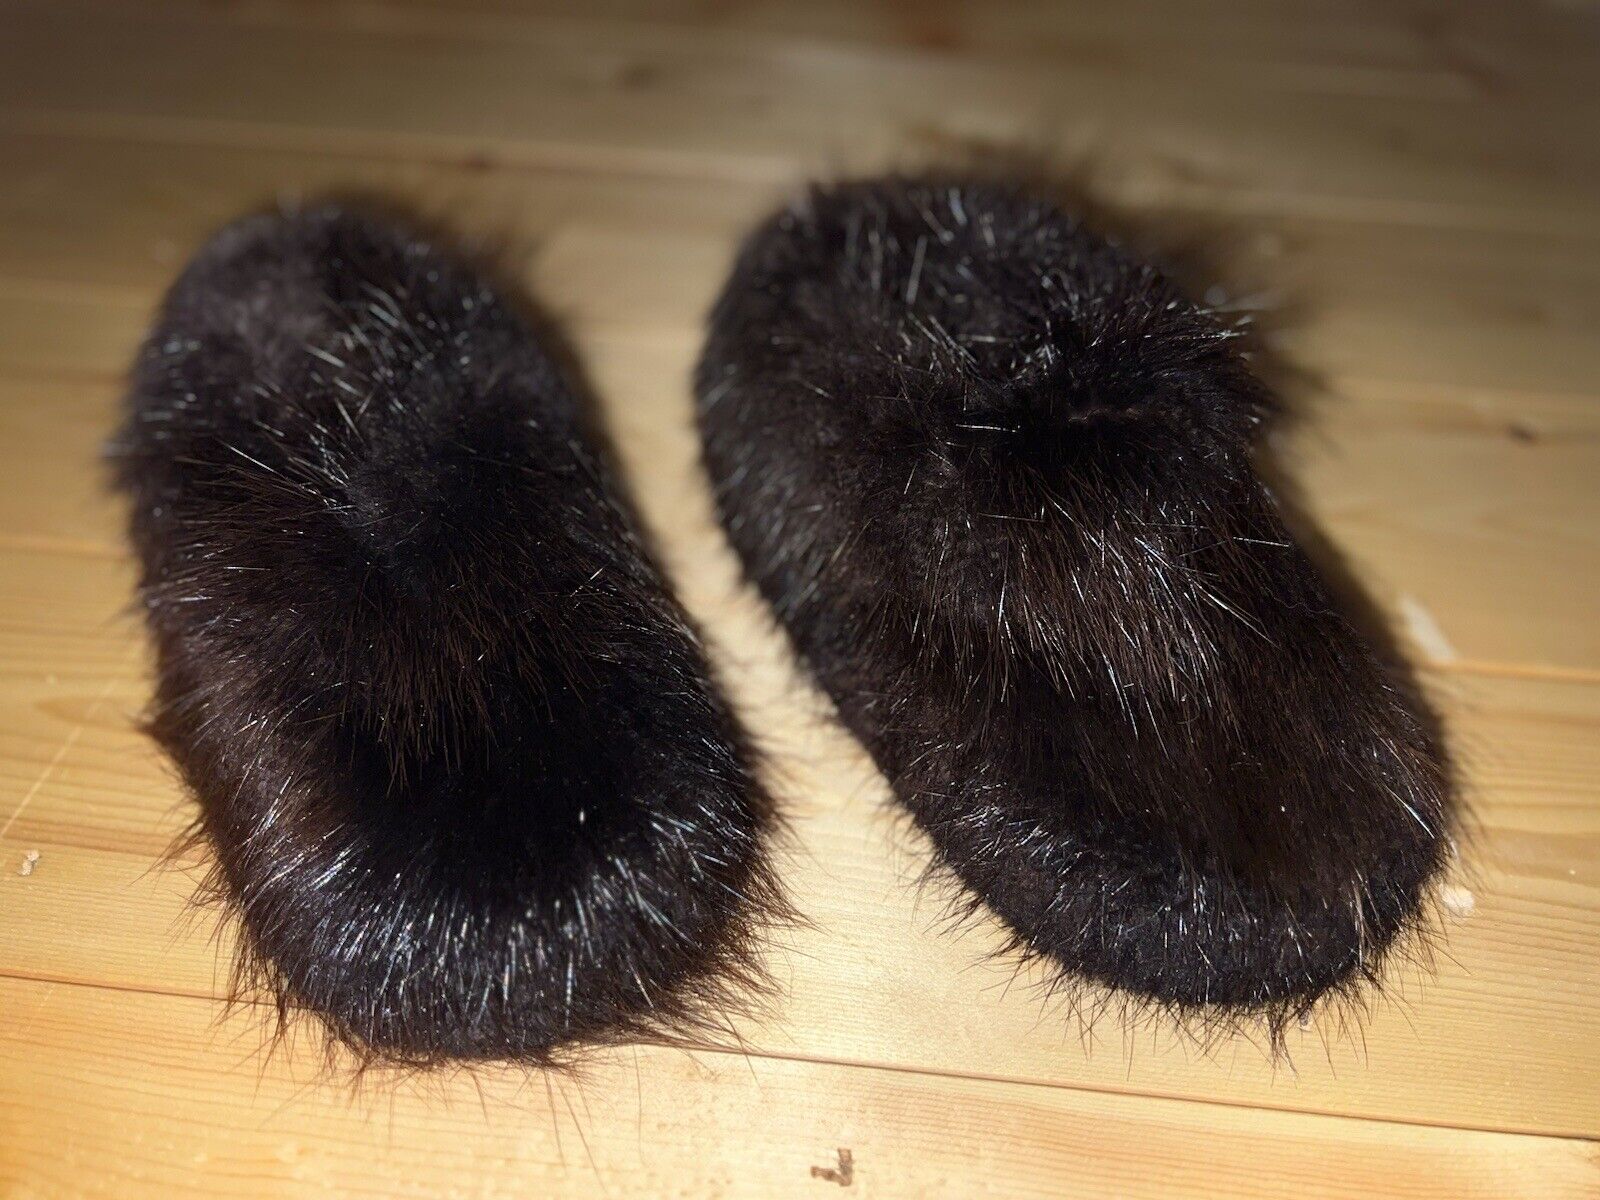 Beaver Fur Moccasins/ Slippers. Purchased In Alaska. Size 5-6